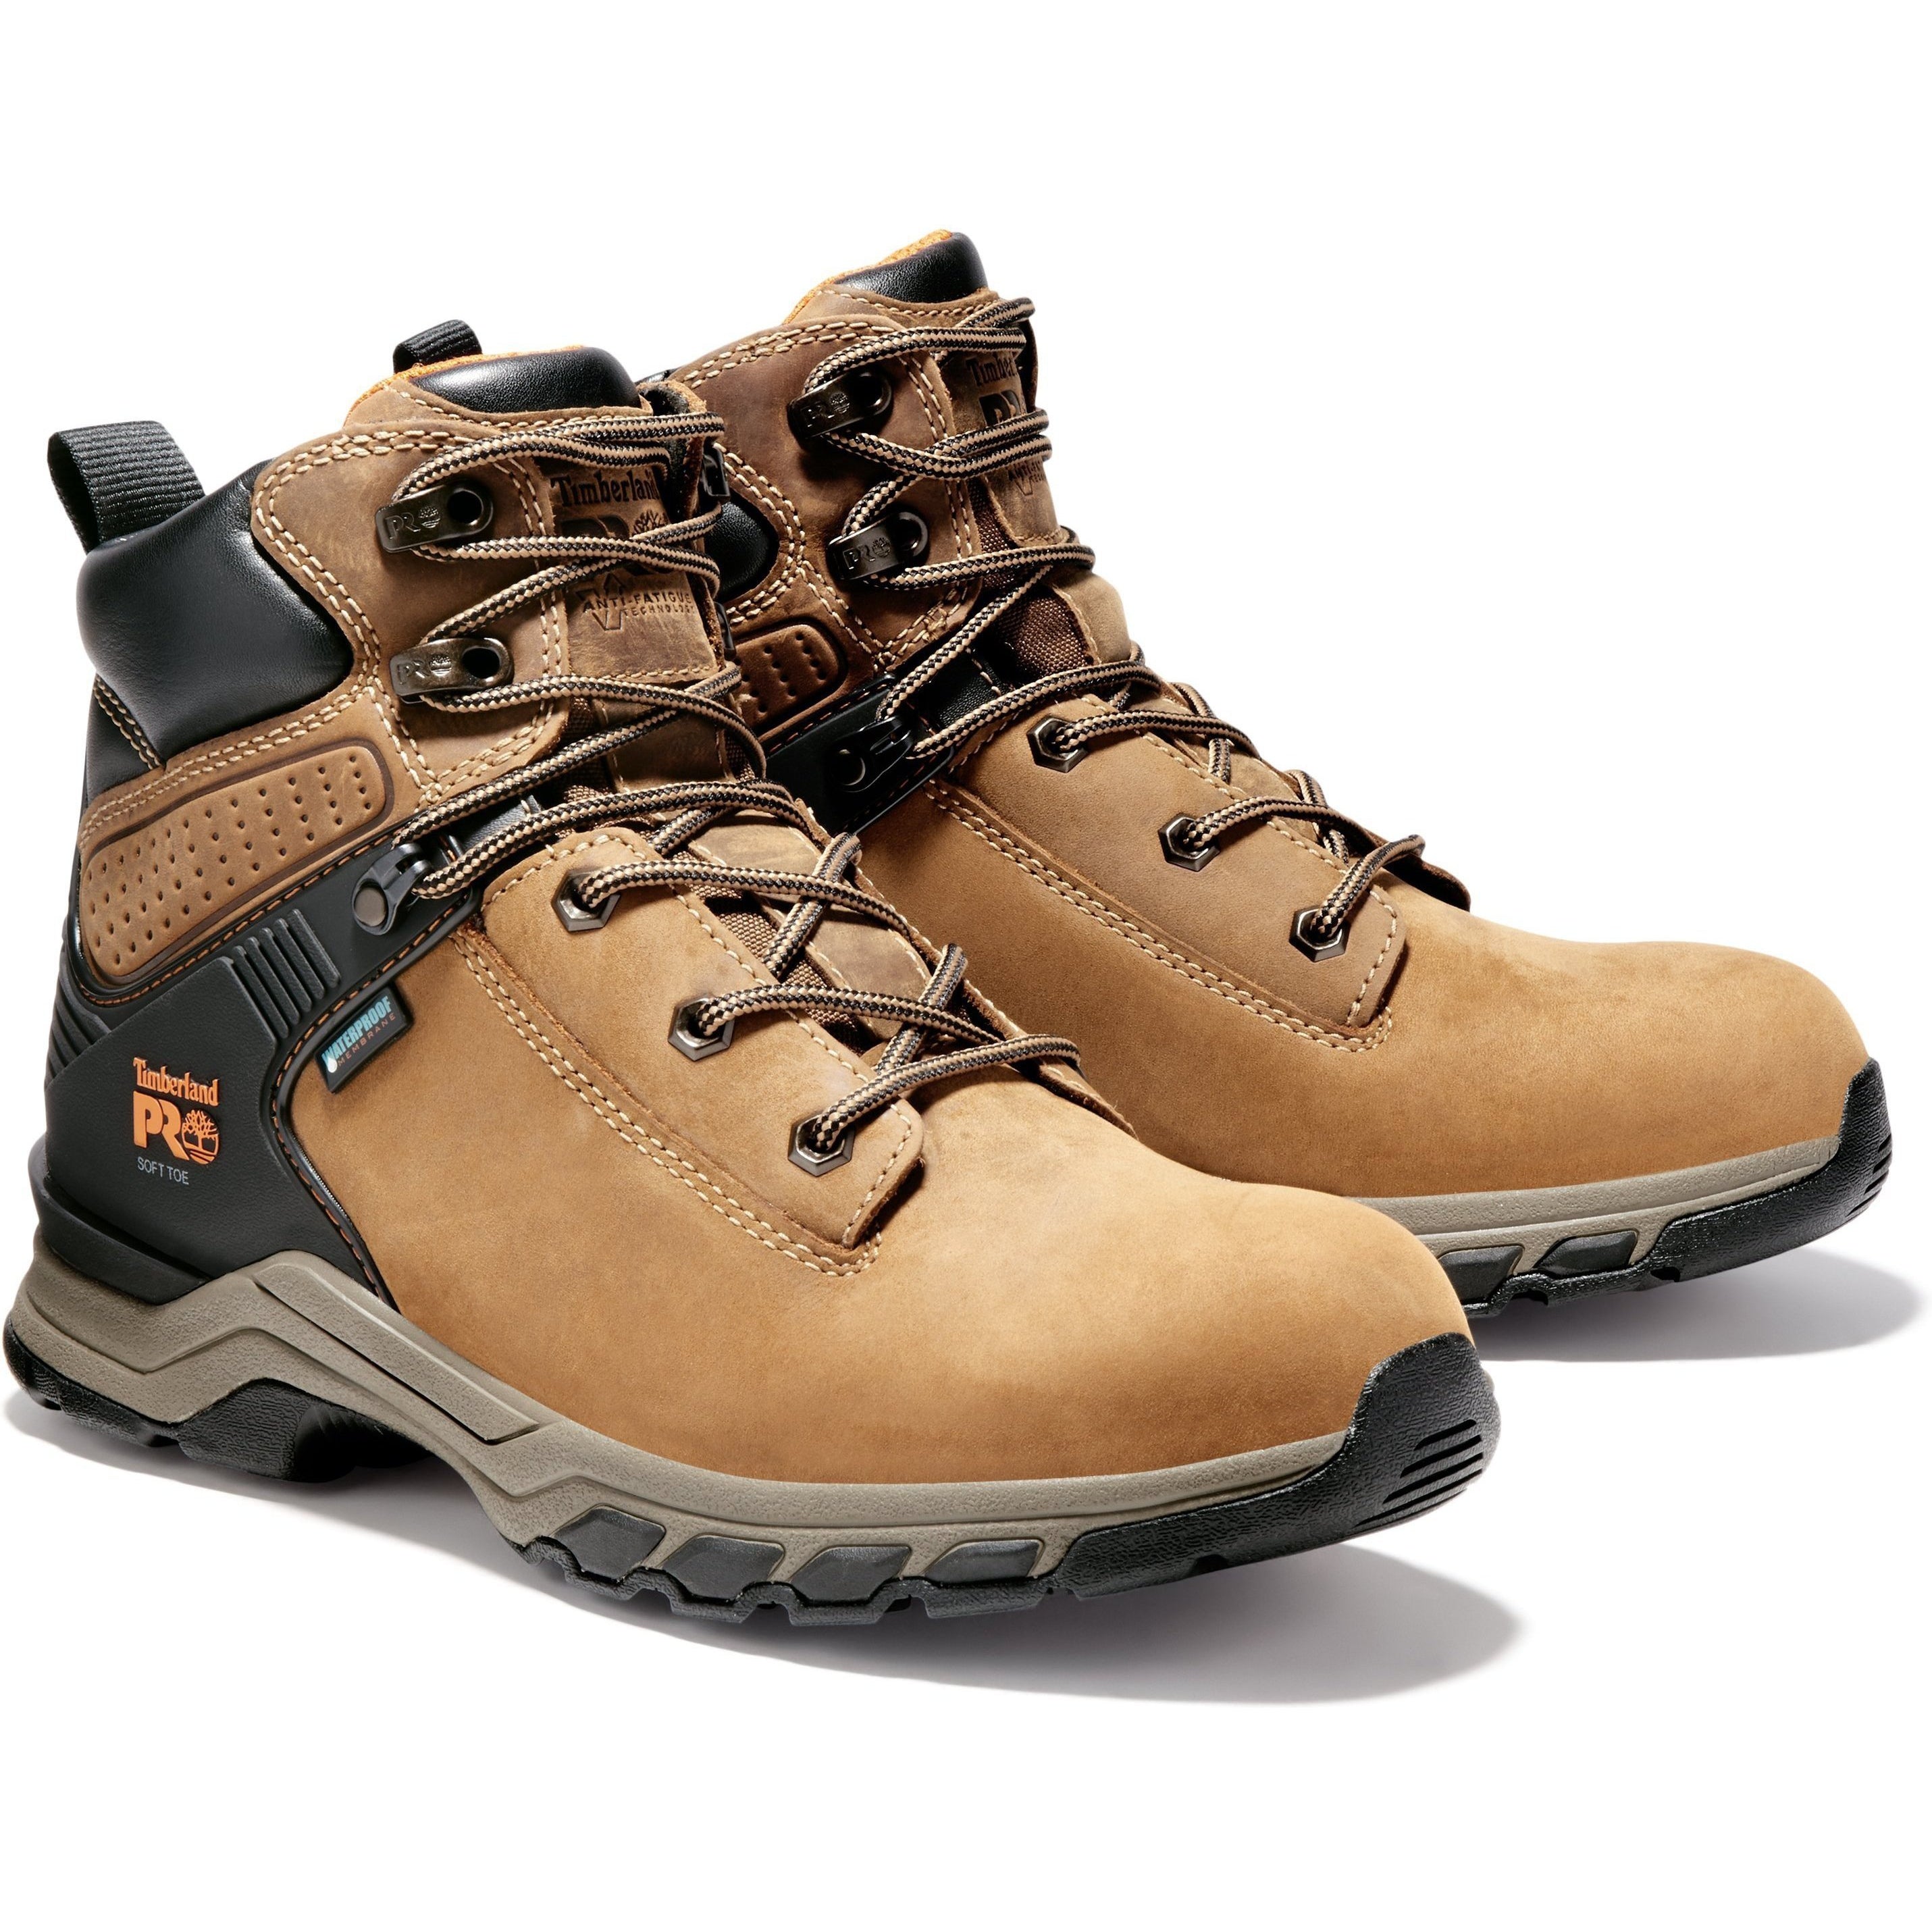 Timberland PRO Men's Hypercharge 6" WP Work Boot - Brown - TB0A1Q56214 8.5 / Medium / Brown - Overlook Boots